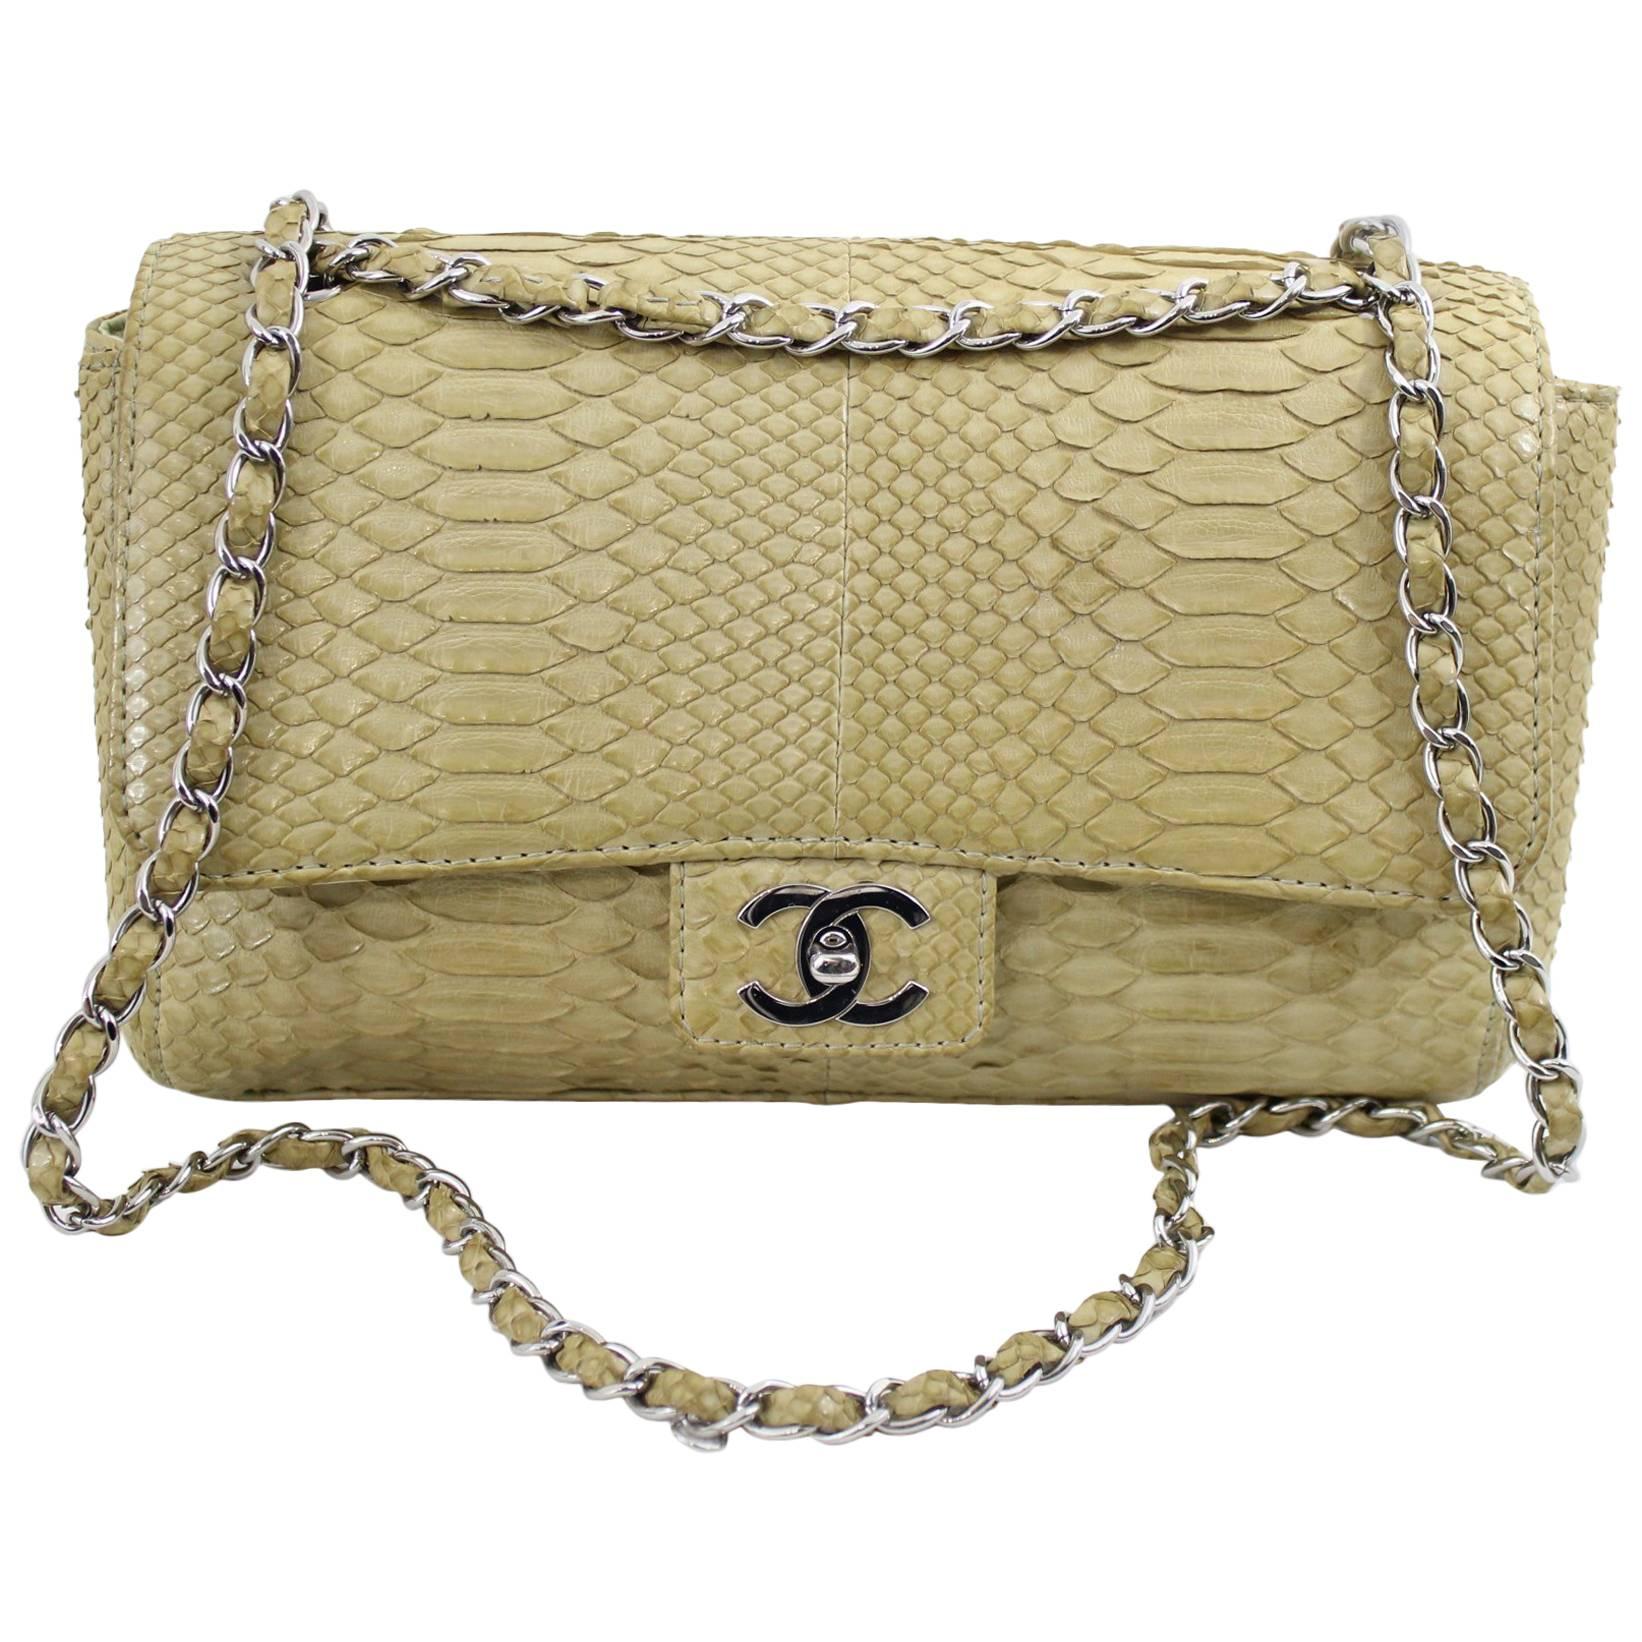 Chanel Timeless Bag in Exotic skin and stainless steel  hardware